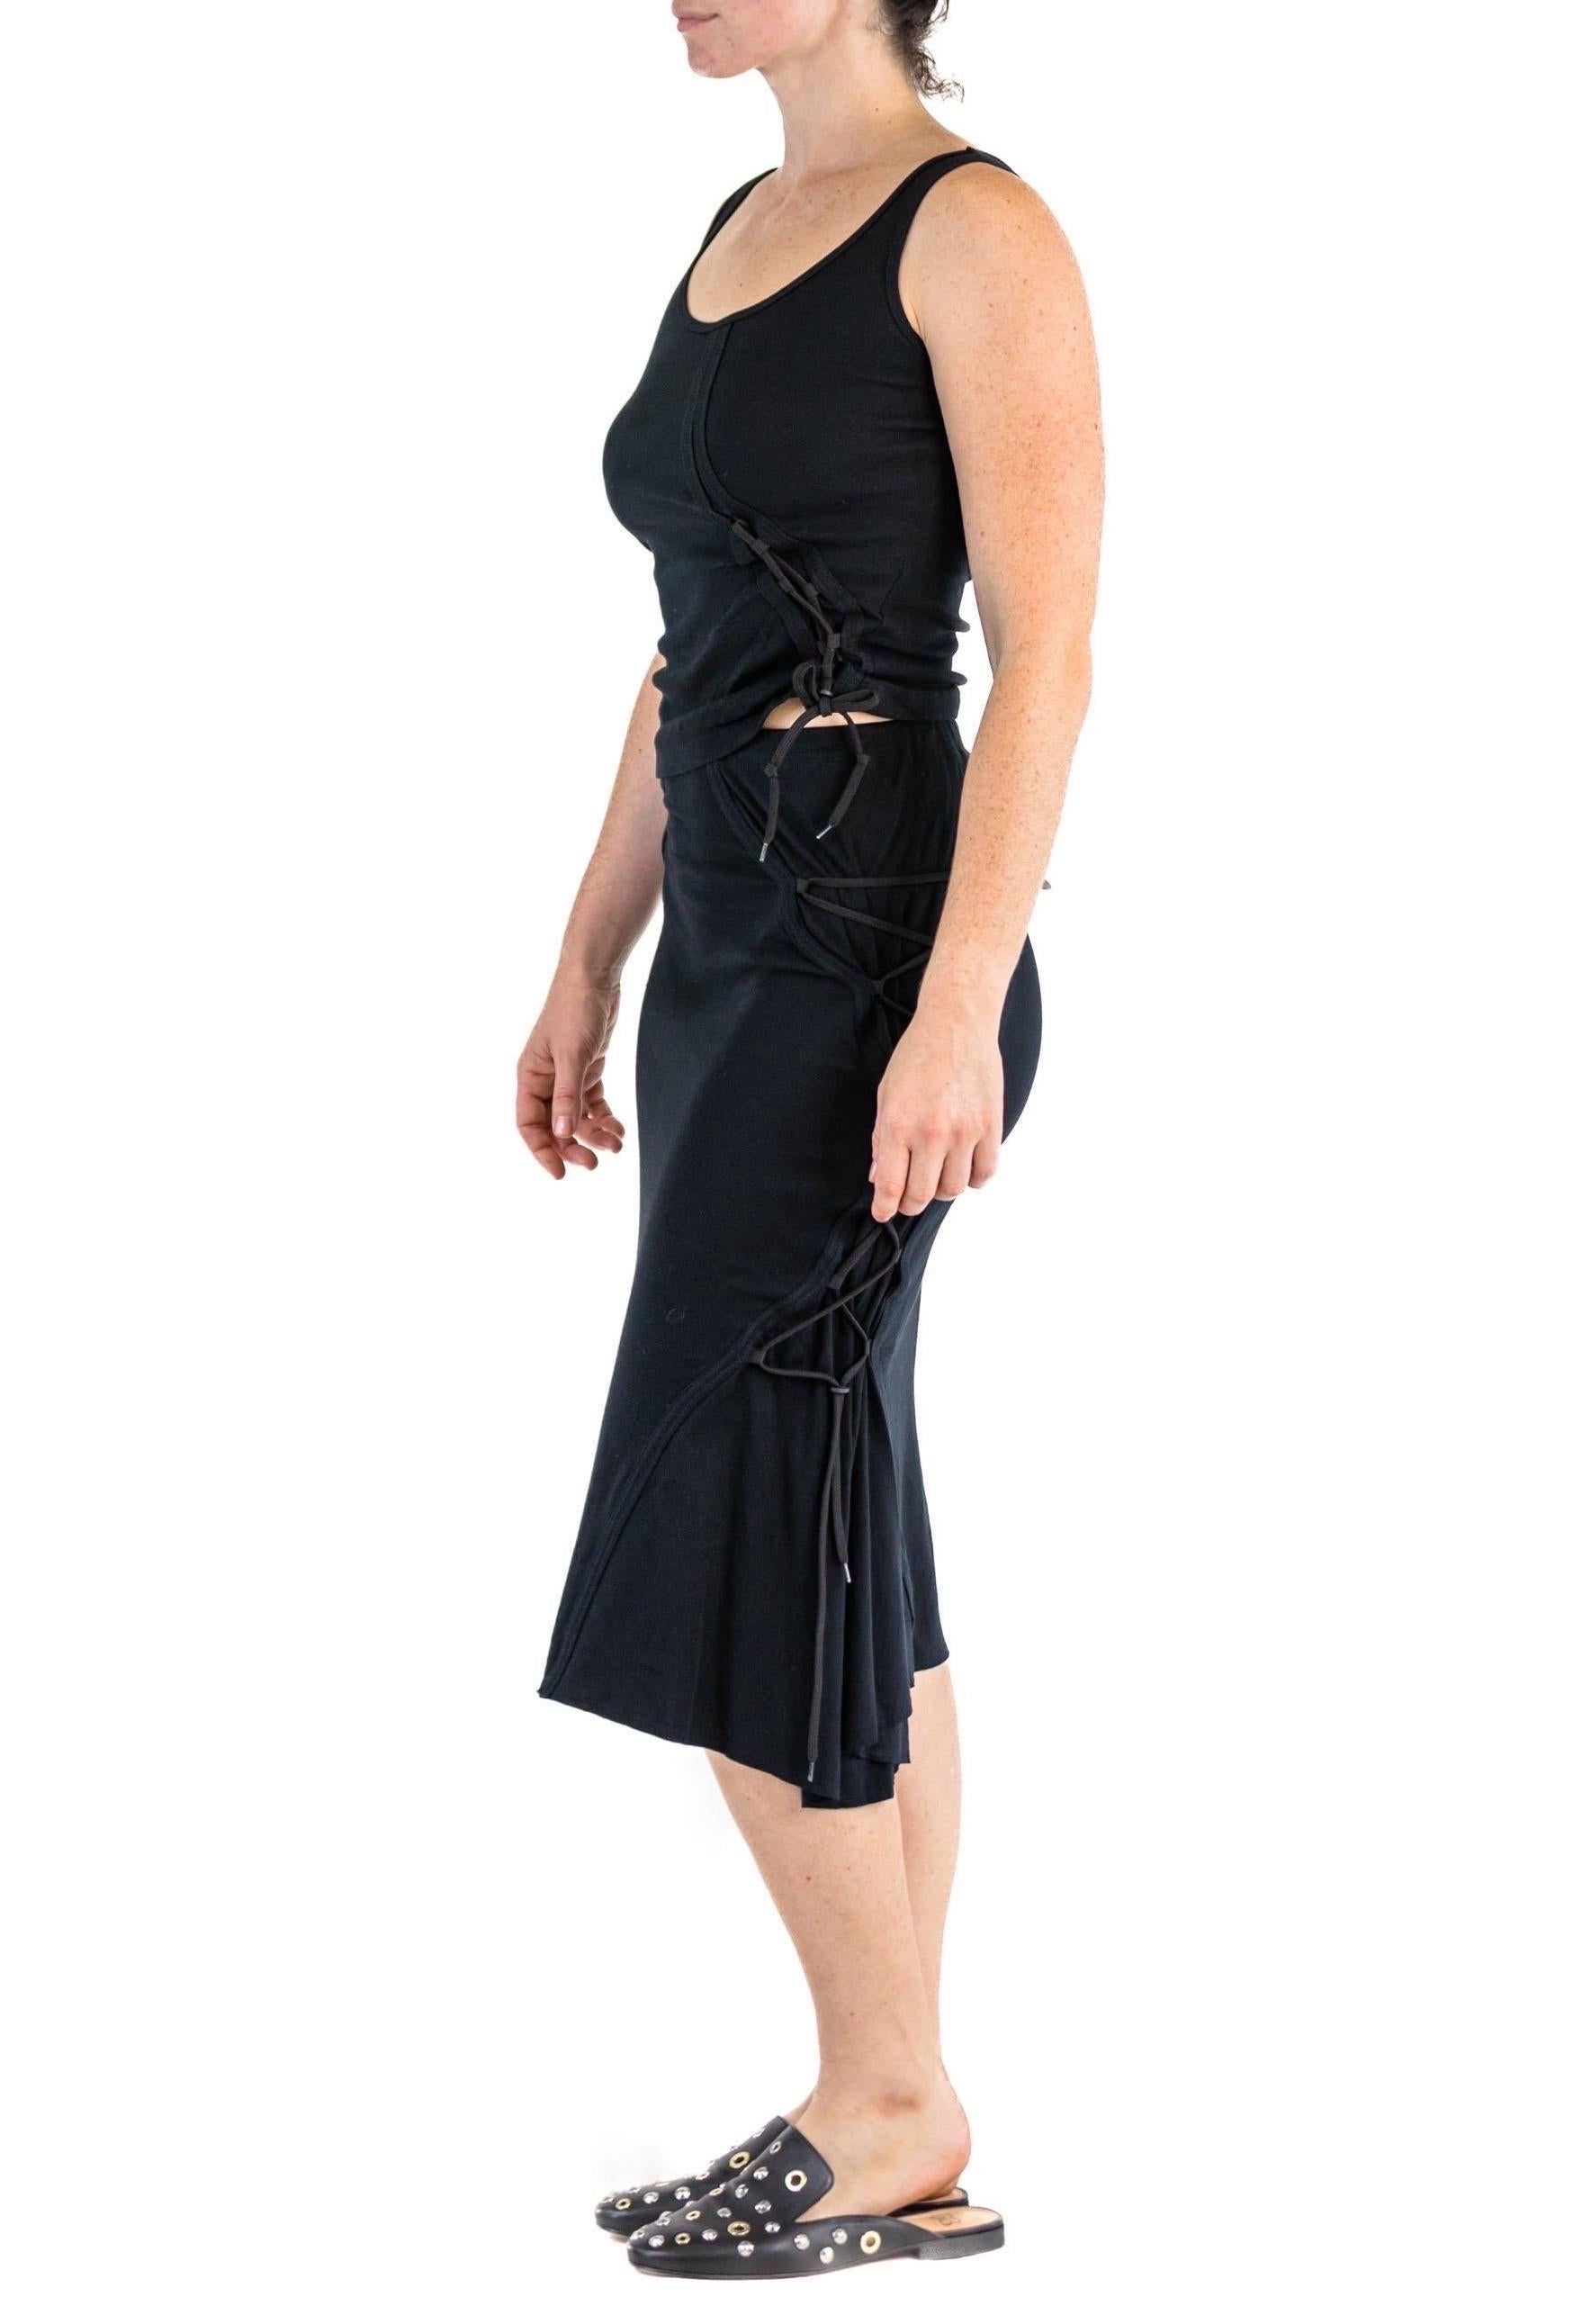 1990S ISSEY MIYAKES Black Cotton Blend Stretch Top & Skirt Ensemble With Lace U For Sale 4